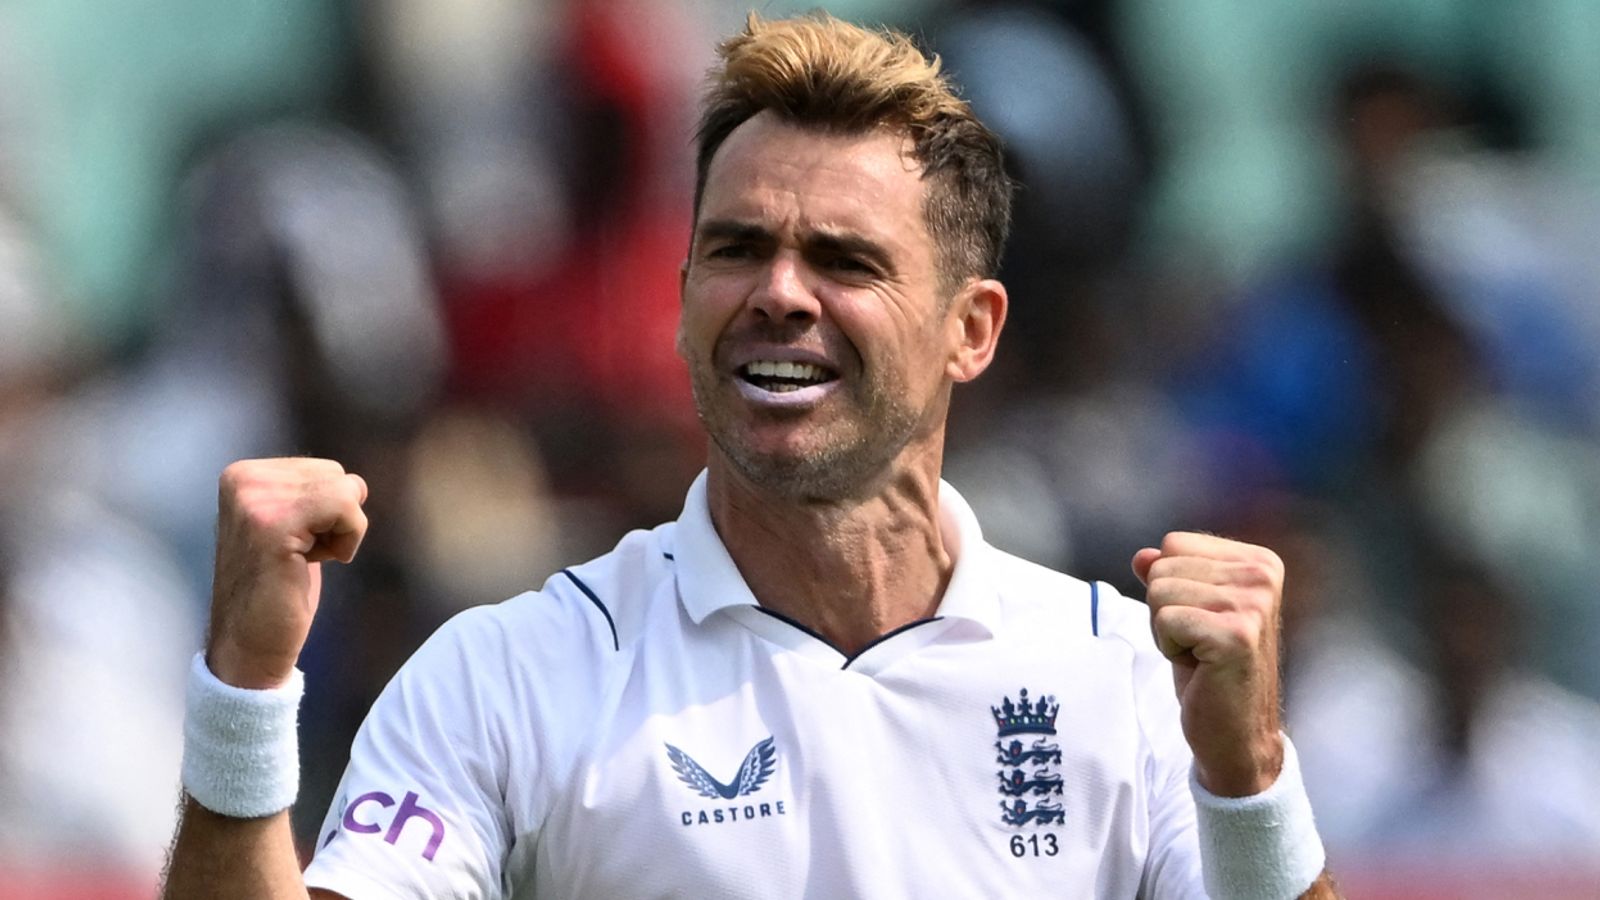 James Anderson one of England’s greatest sportspeople as he continues to star in his 40s, says Michael Atherton